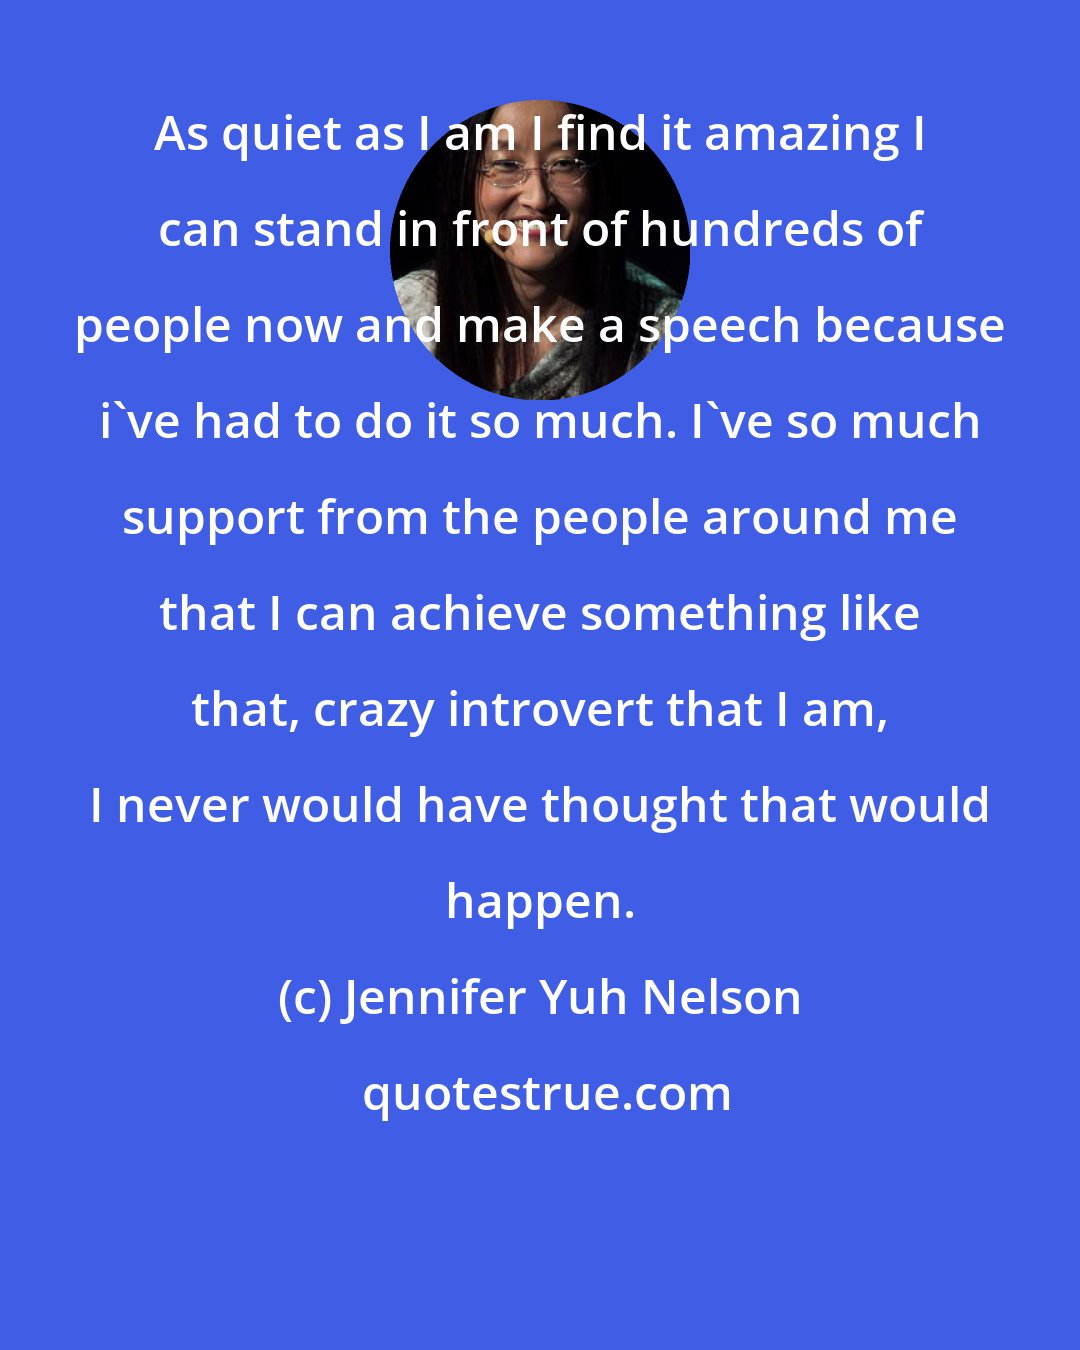 Jennifer Yuh Nelson: As quiet as I am I find it amazing I can stand in front of hundreds of people now and make a speech because i've had to do it so much. I've so much support from the people around me that I can achieve something like that, crazy introvert that I am, I never would have thought that would happen.